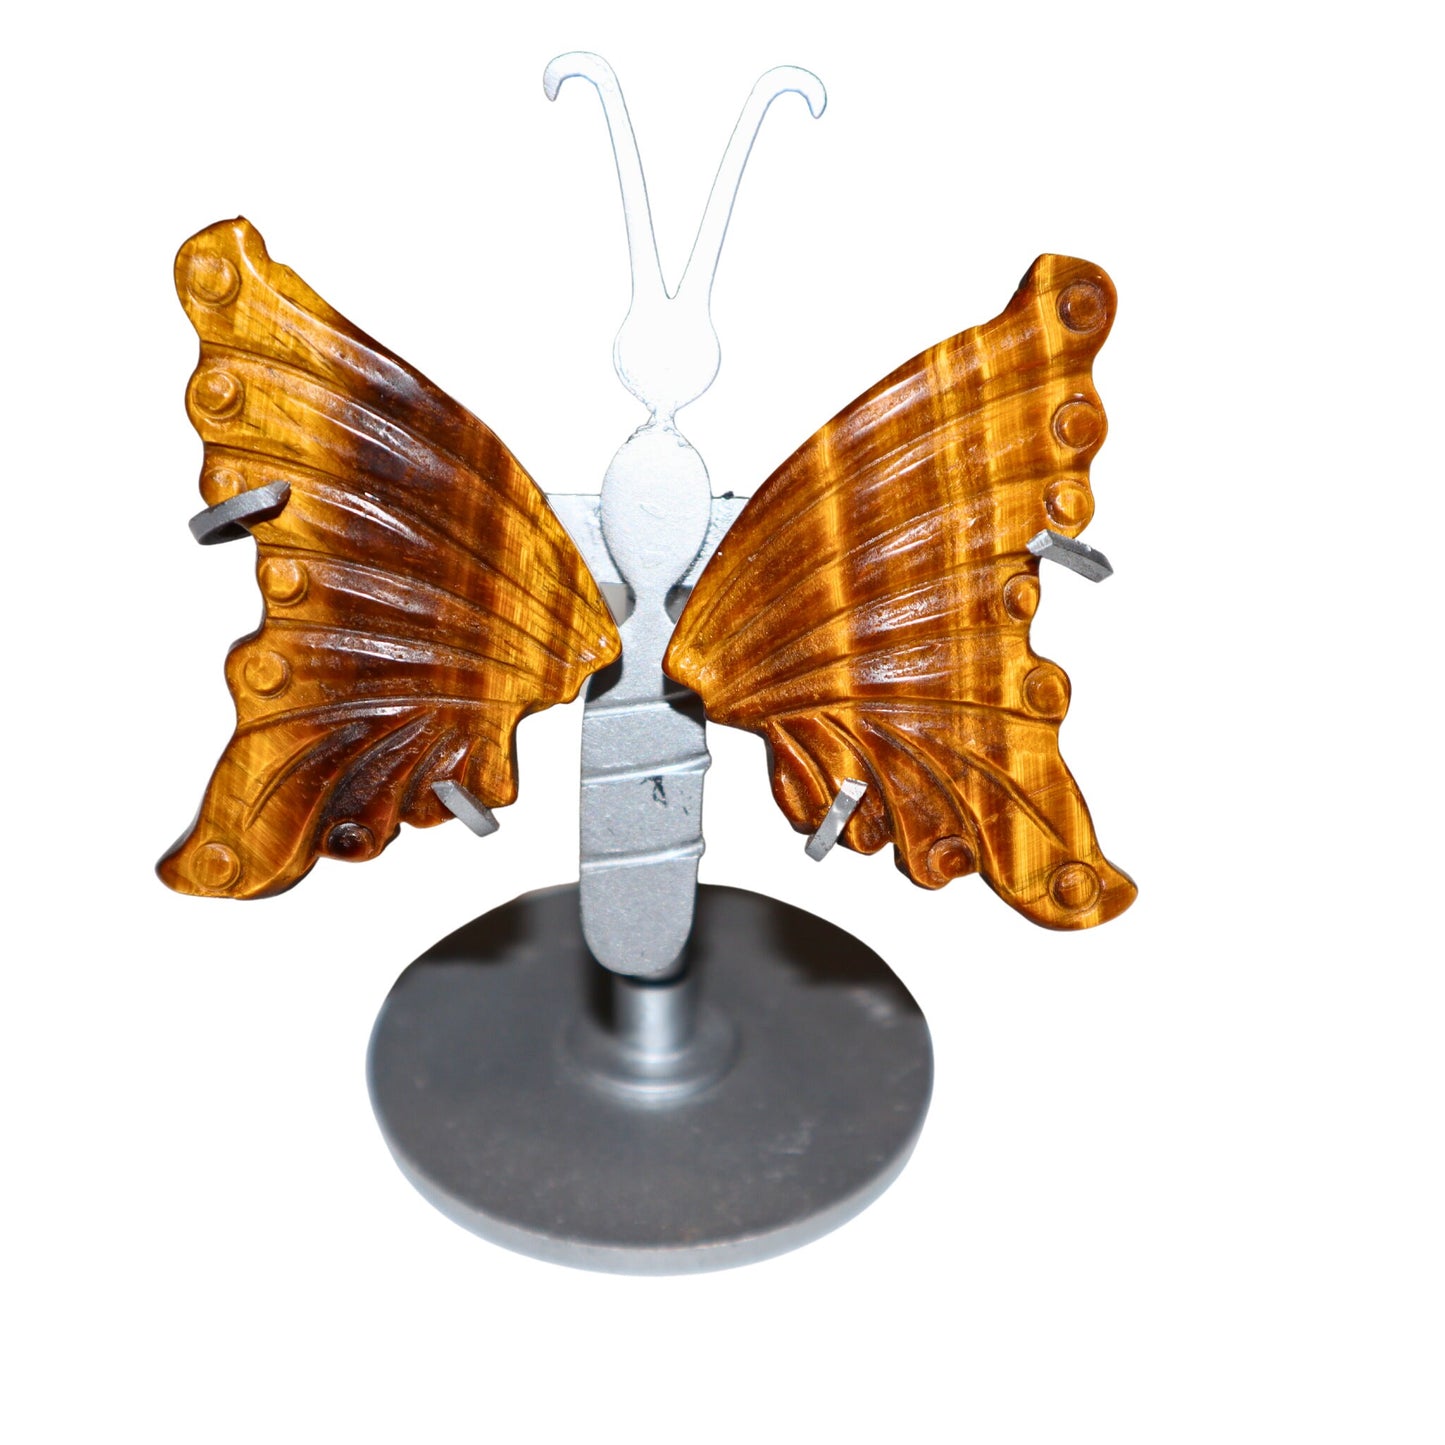 Crystal Butterfly Wings with Stand, Smoky Quartz Wings, Tigers Eye Wings, Natural Crystal Carving, Butterfly Wings